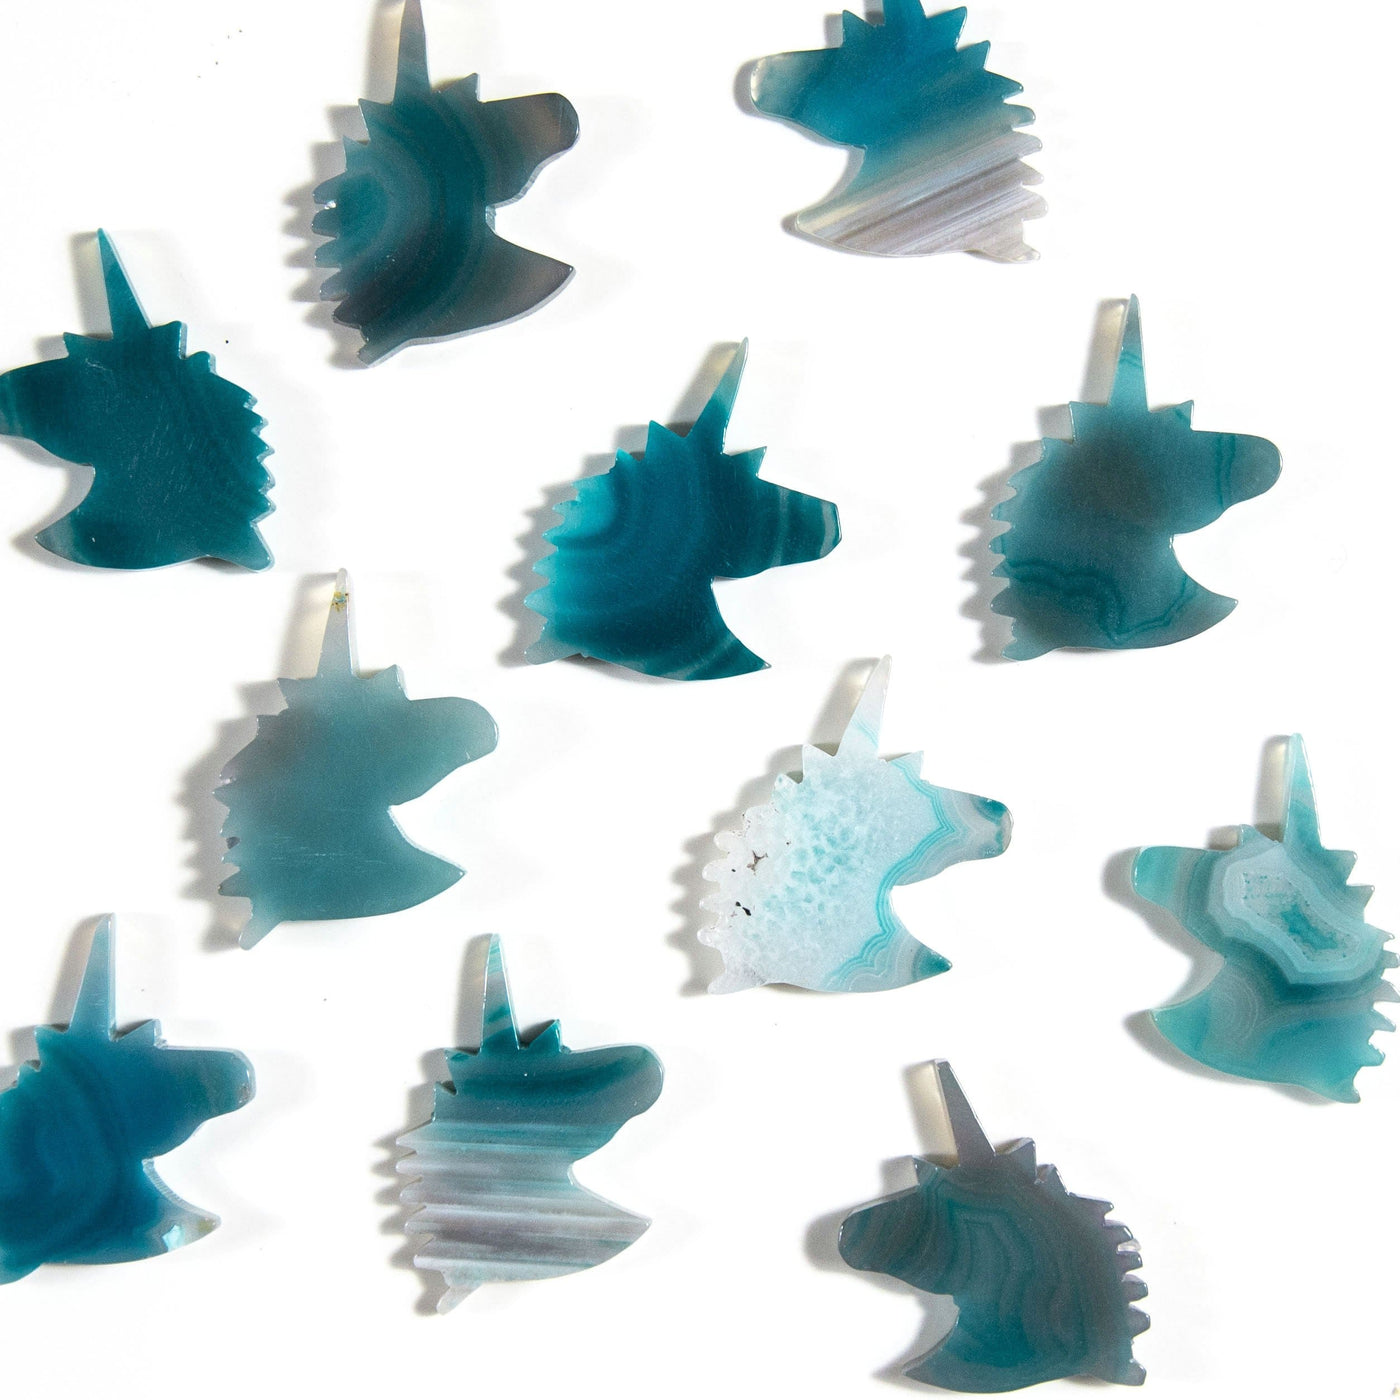 Teal agate unicorn heads being displayed on a white background. 